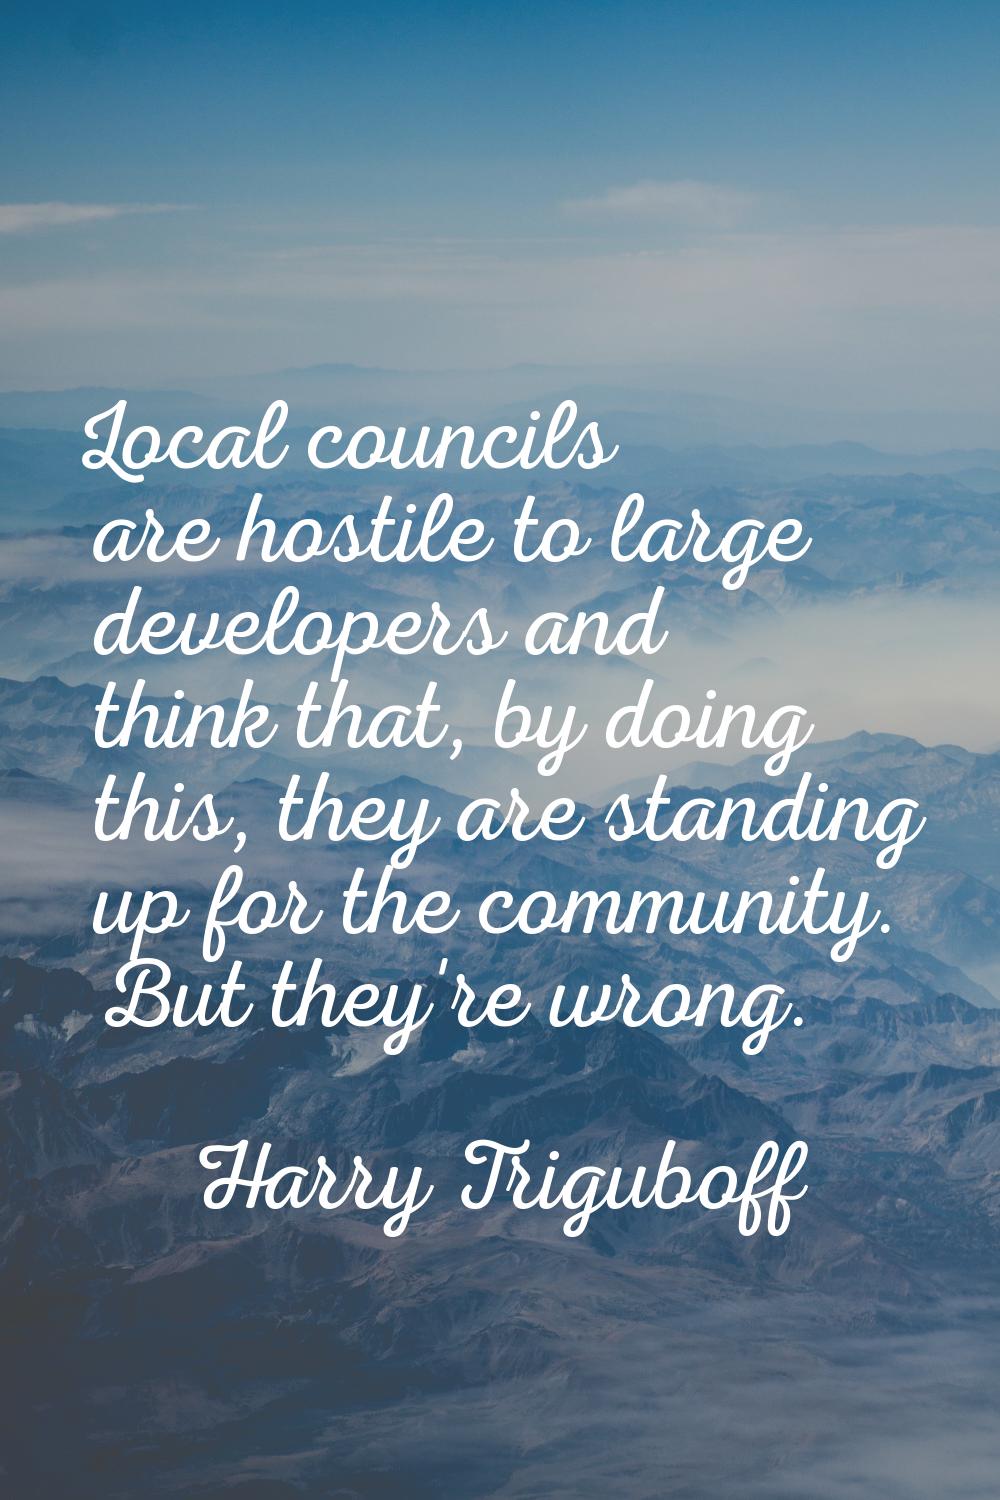 Local councils are hostile to large developers and think that, by doing this, they are standing up 